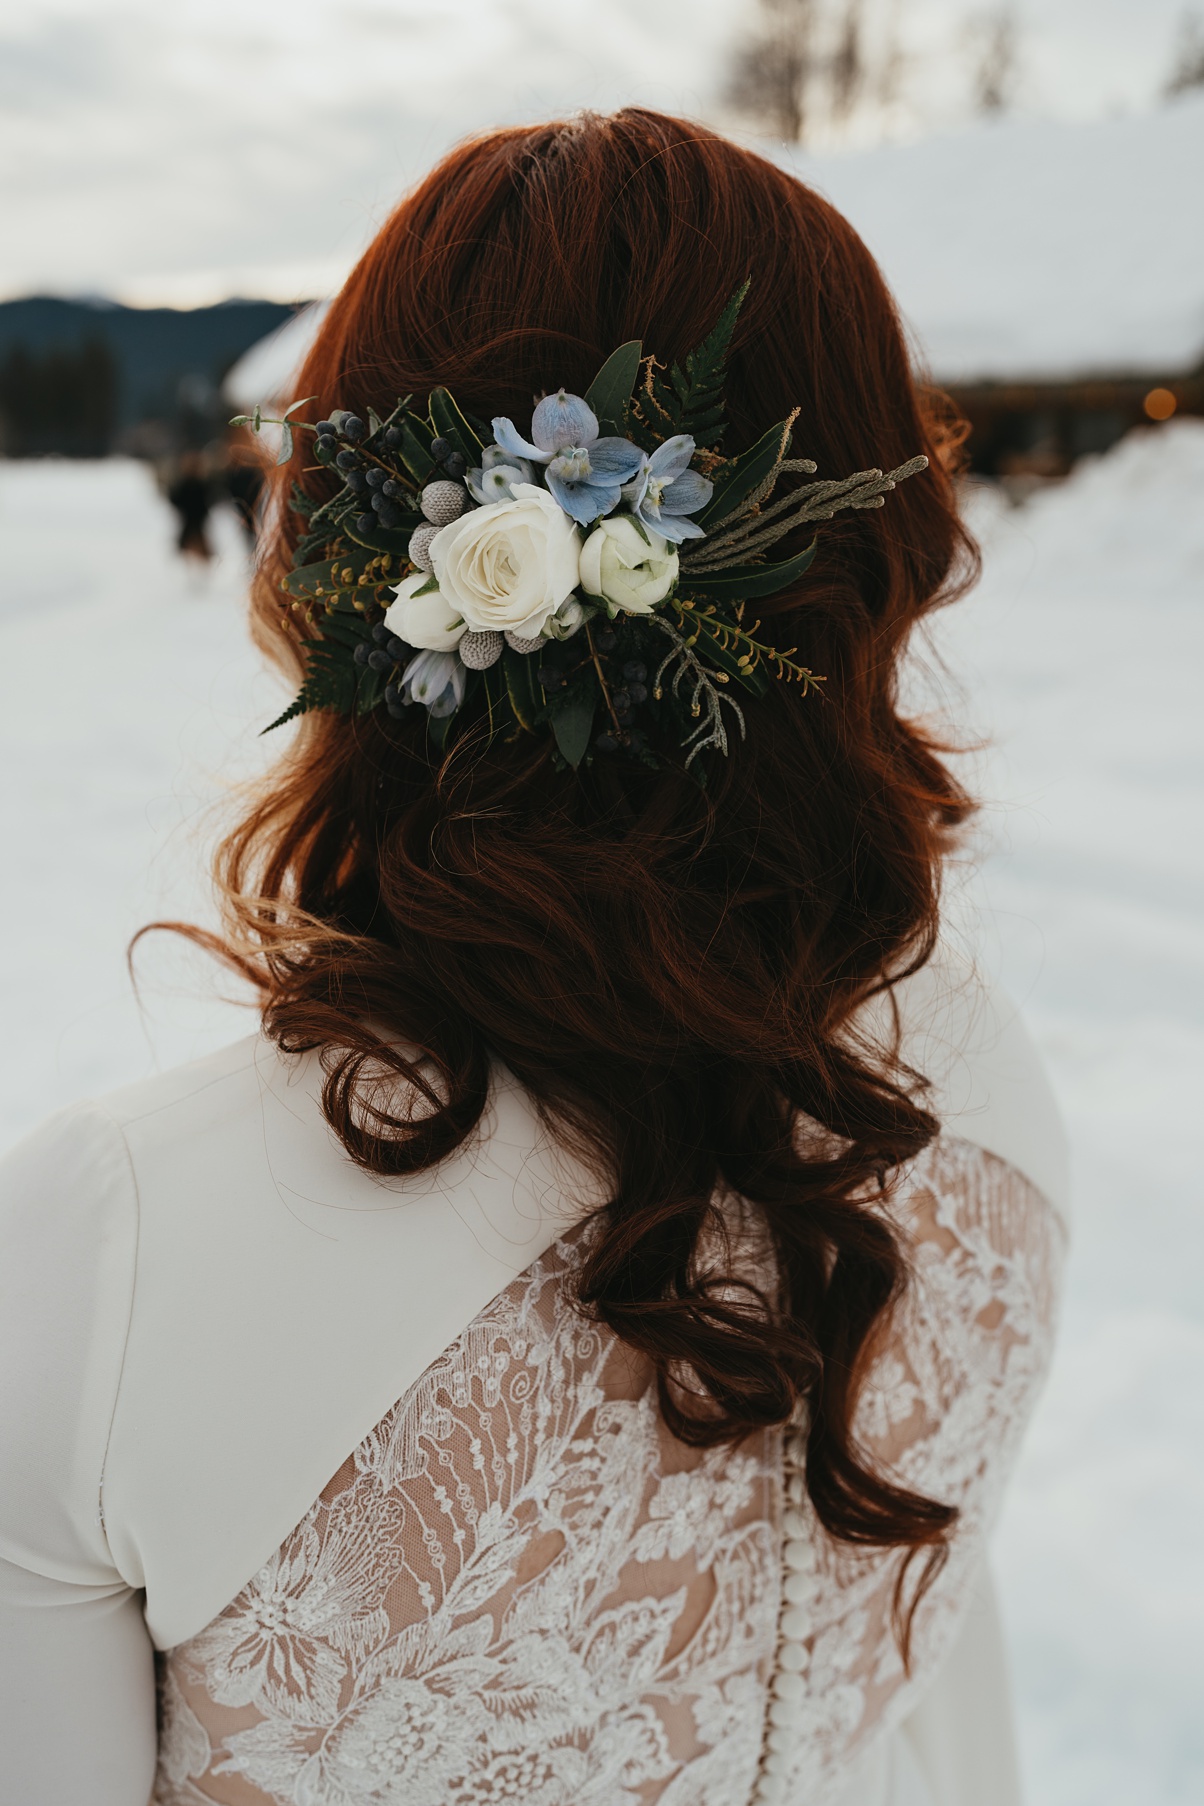 A bride with red hair and gorgeous flowers in her hair